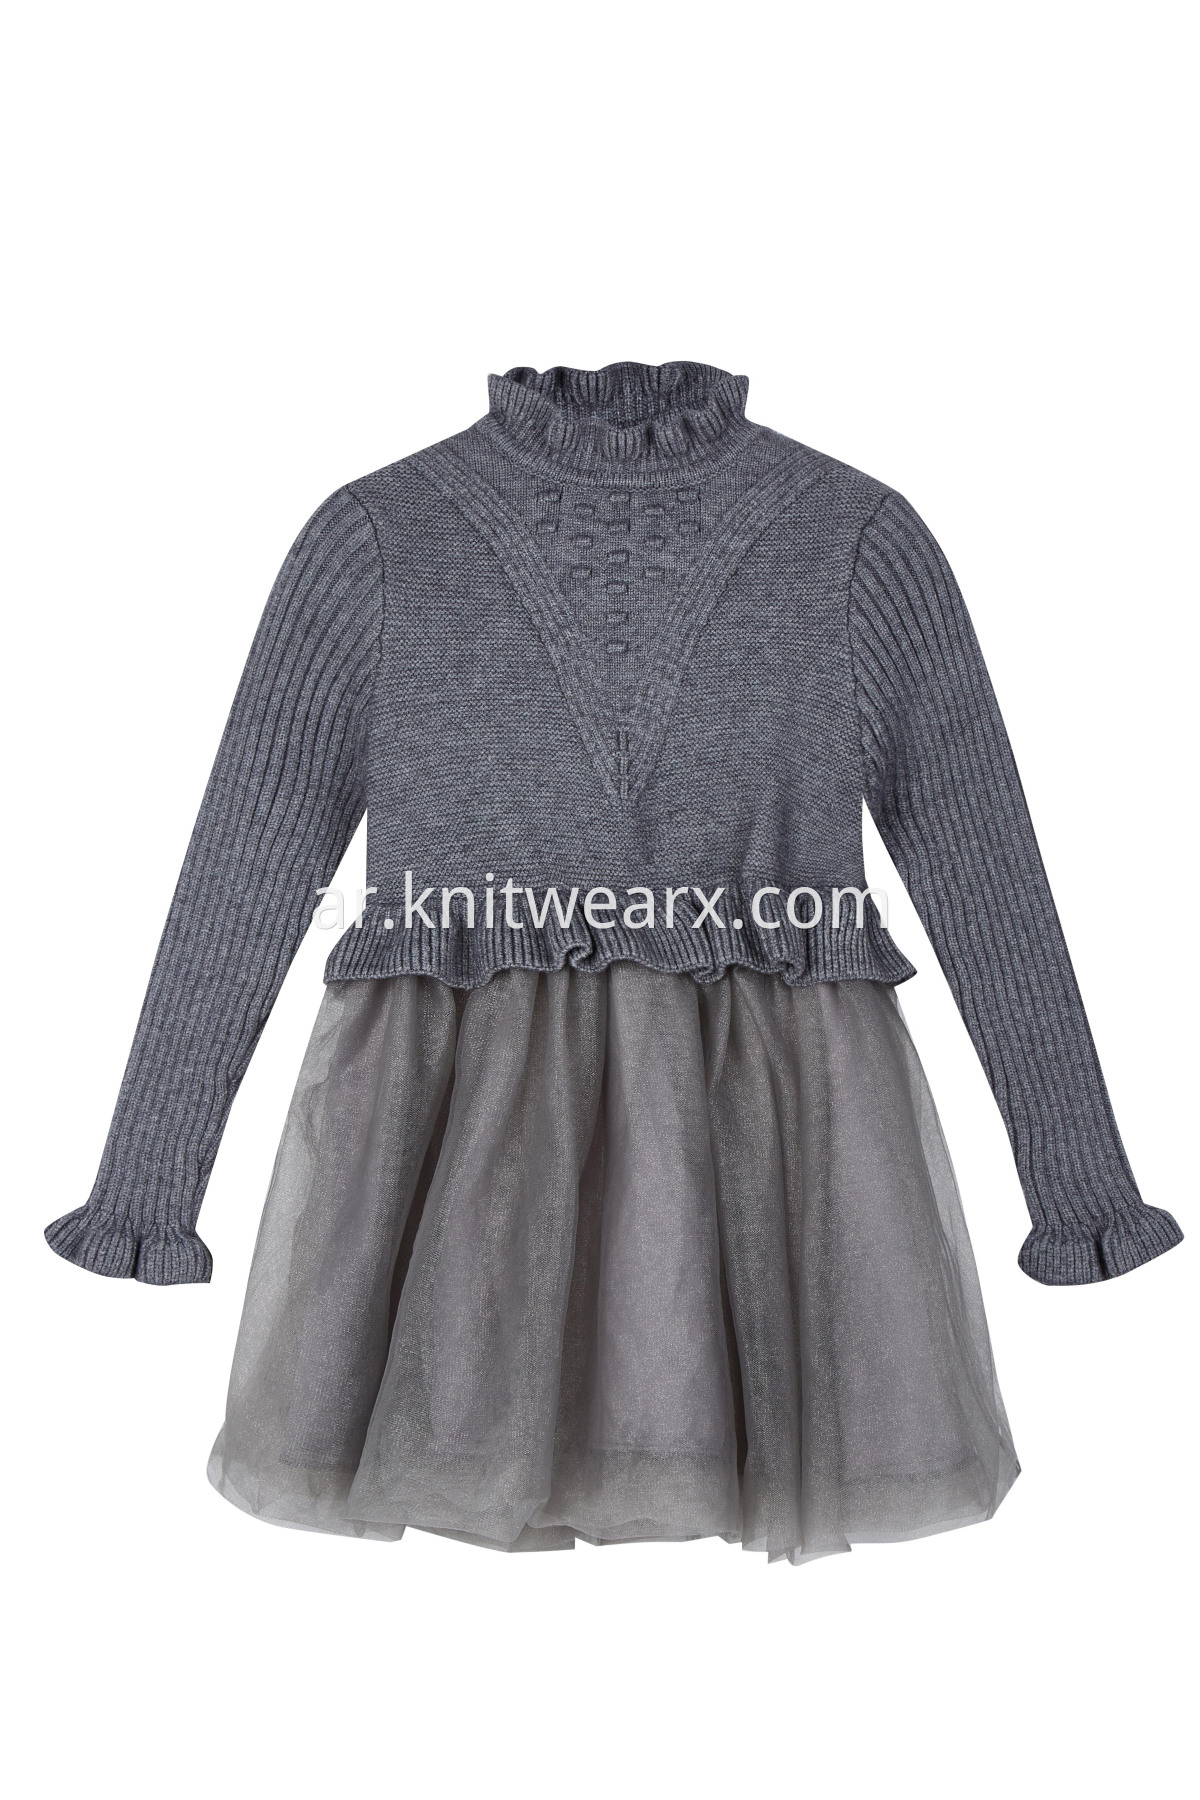 Girl's Fall Winter Good Look Knitted Dress Warm Outfit Skirt